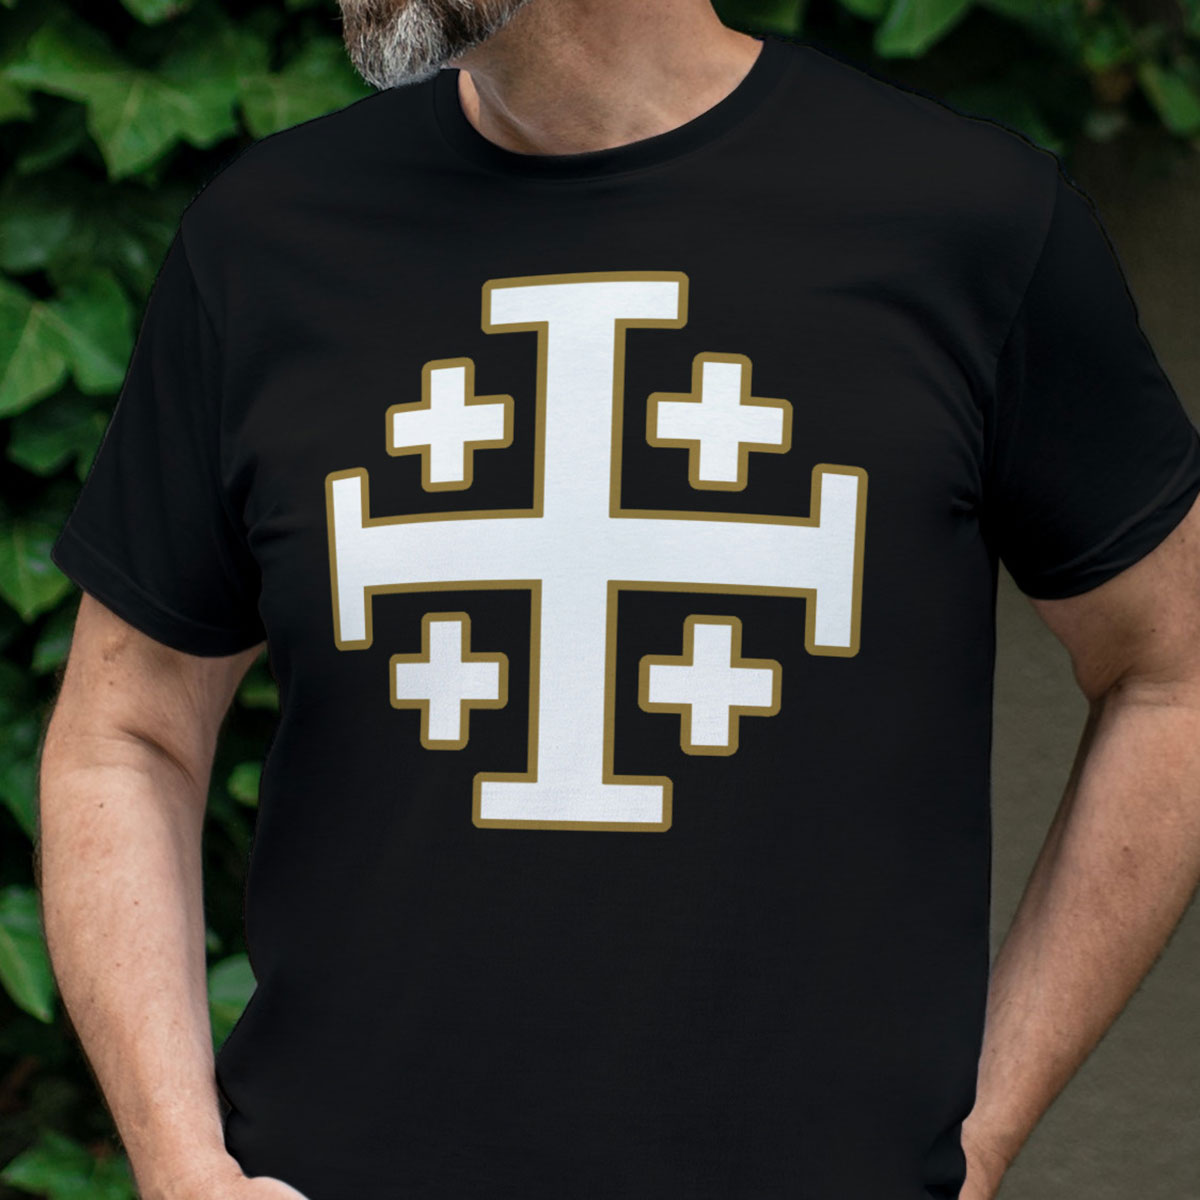 FREE First Month - Catholic T-Shirt Subscription for Men